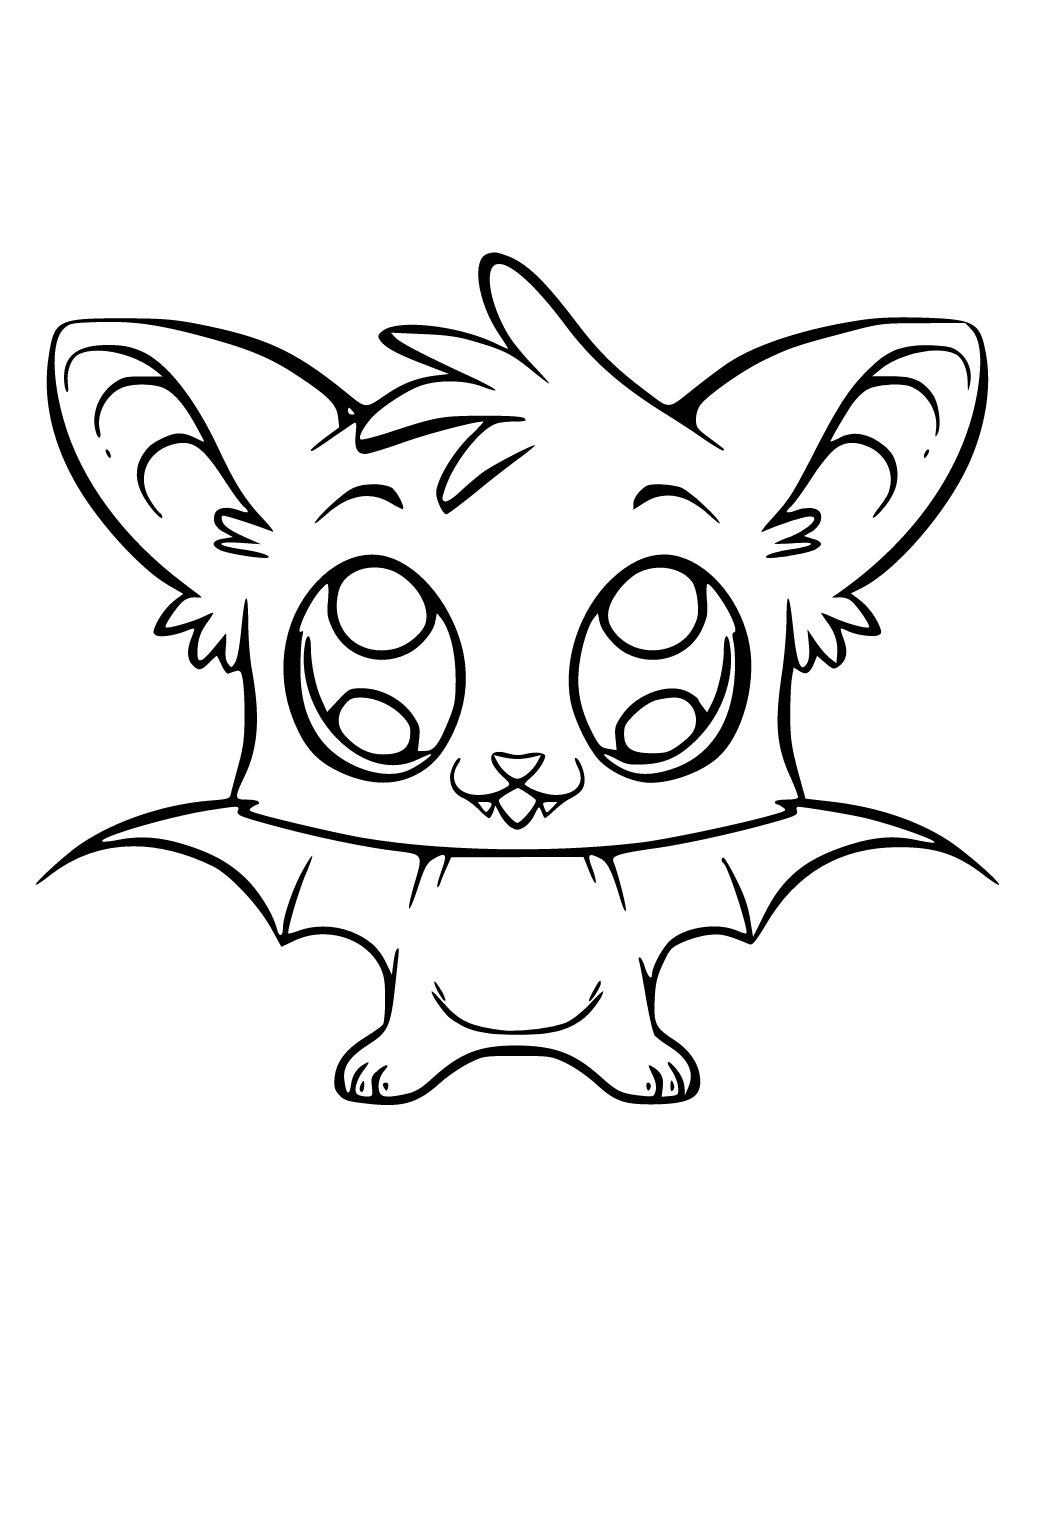 Free Printable Bat Cute Coloring Page for Adults and Kids - Lystok.com